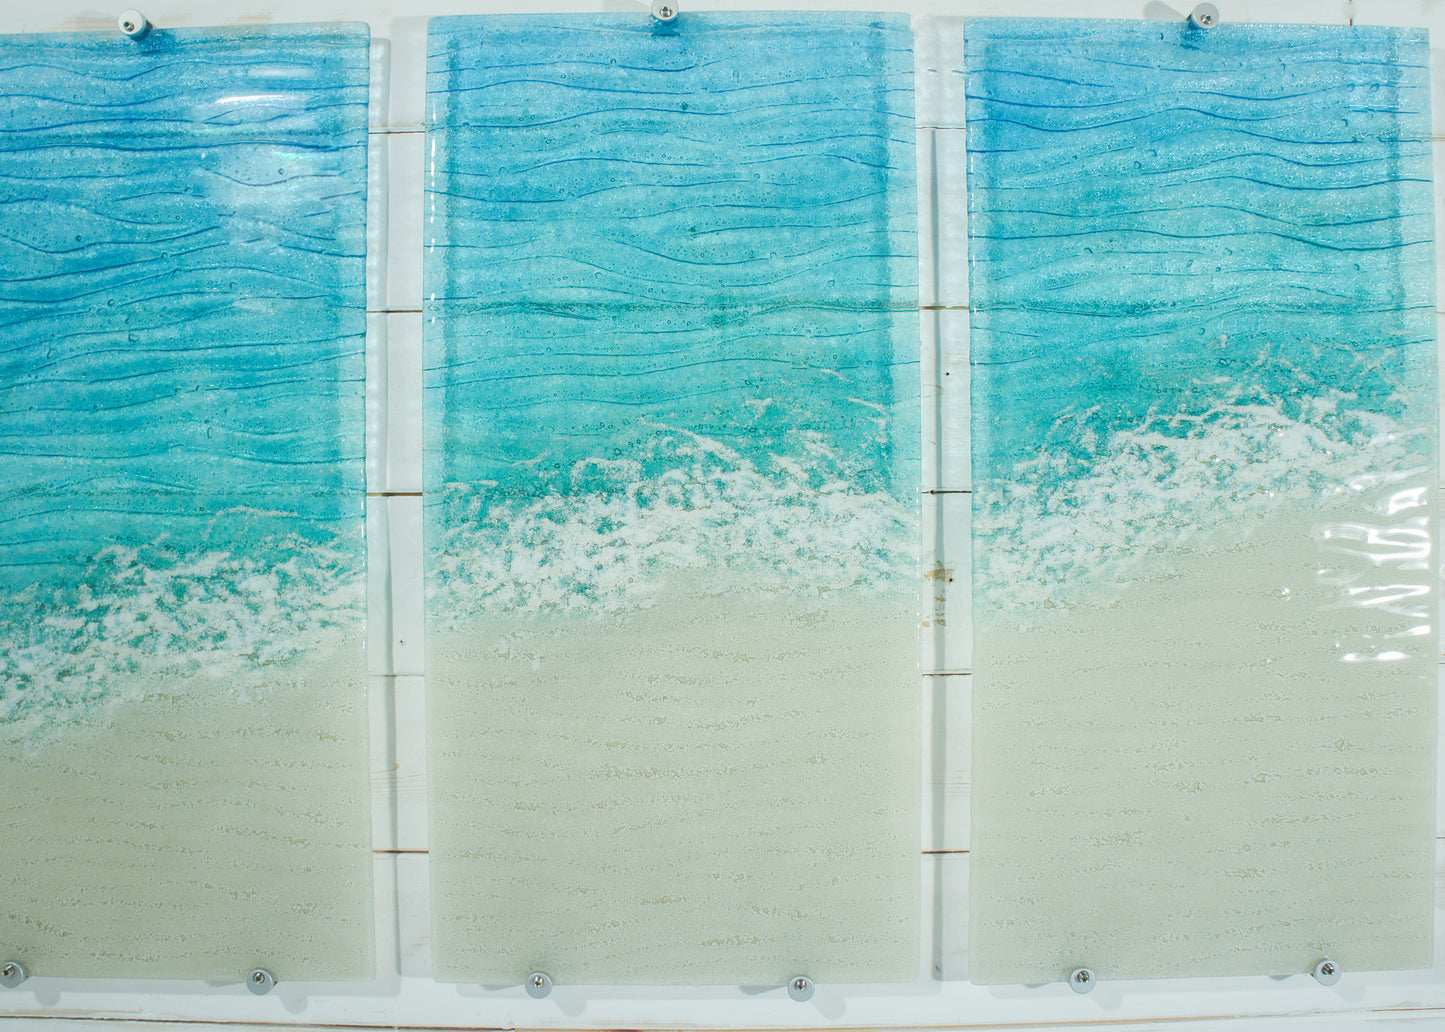 Triptych Paradise Panels - OVERALL 100x60cm (40x23") incl. gaps and 9 fixings - Each Panel 30x60cm (12x23") Large Portrait Paradise Fused Glass Wall Art